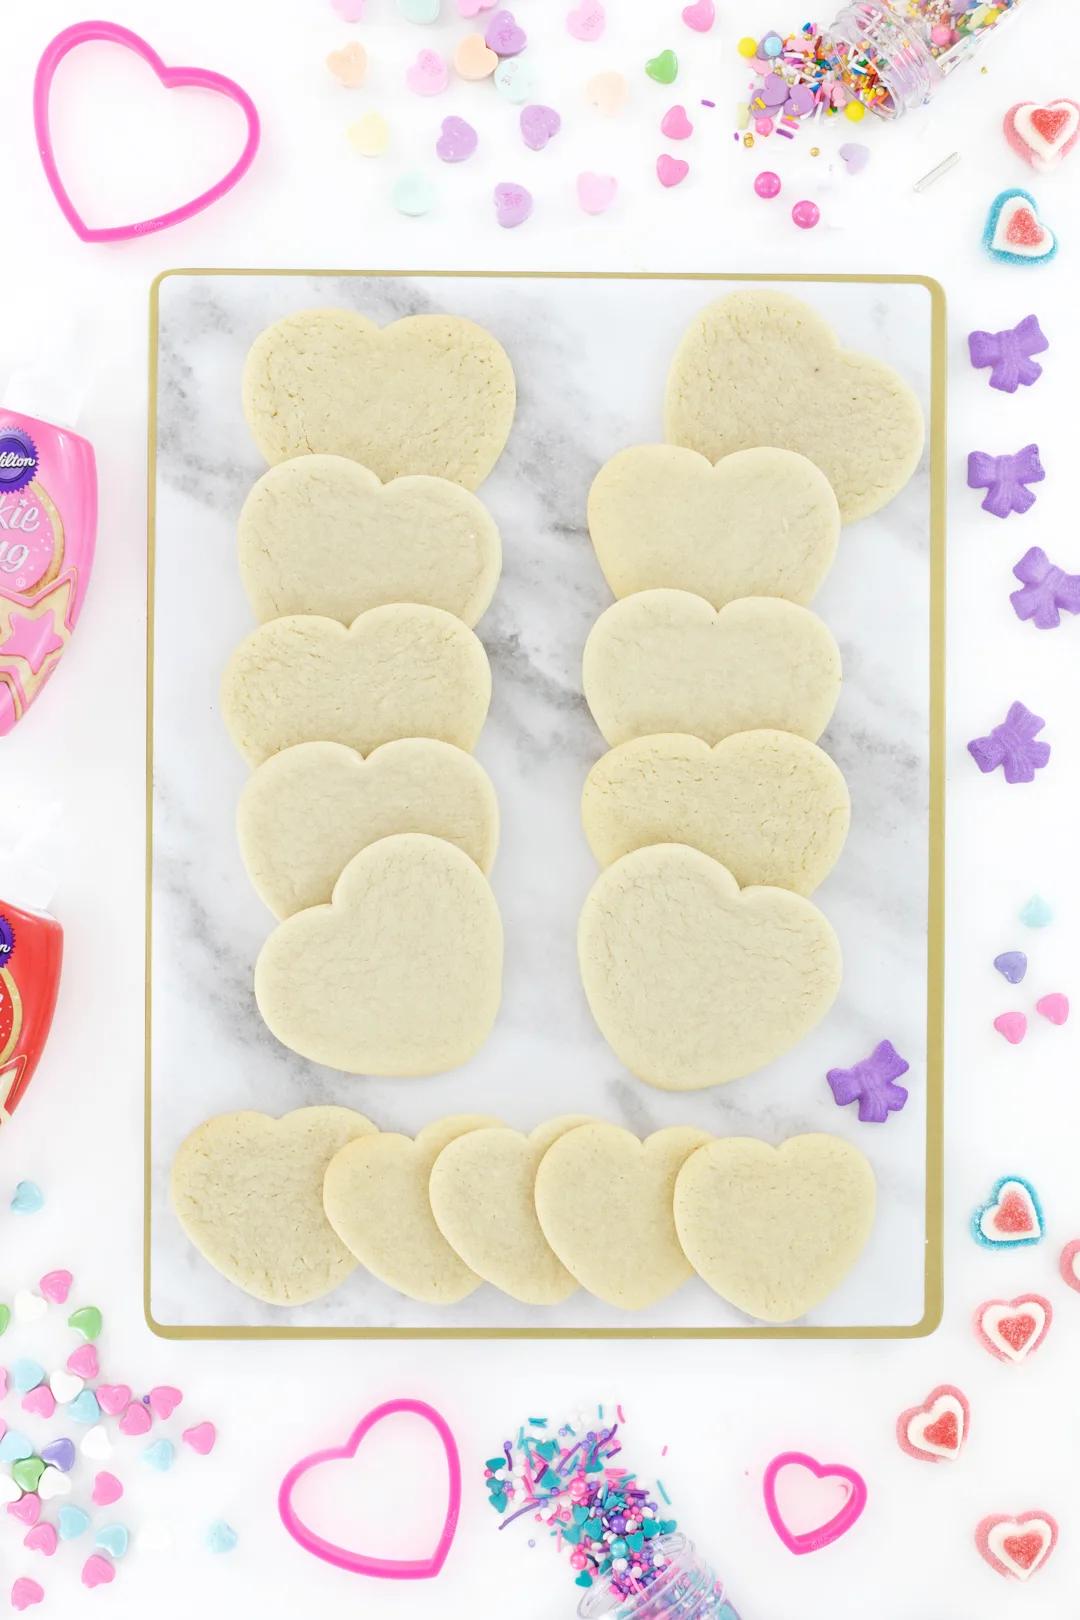 Tray of plain heart sugar cookies to decorate